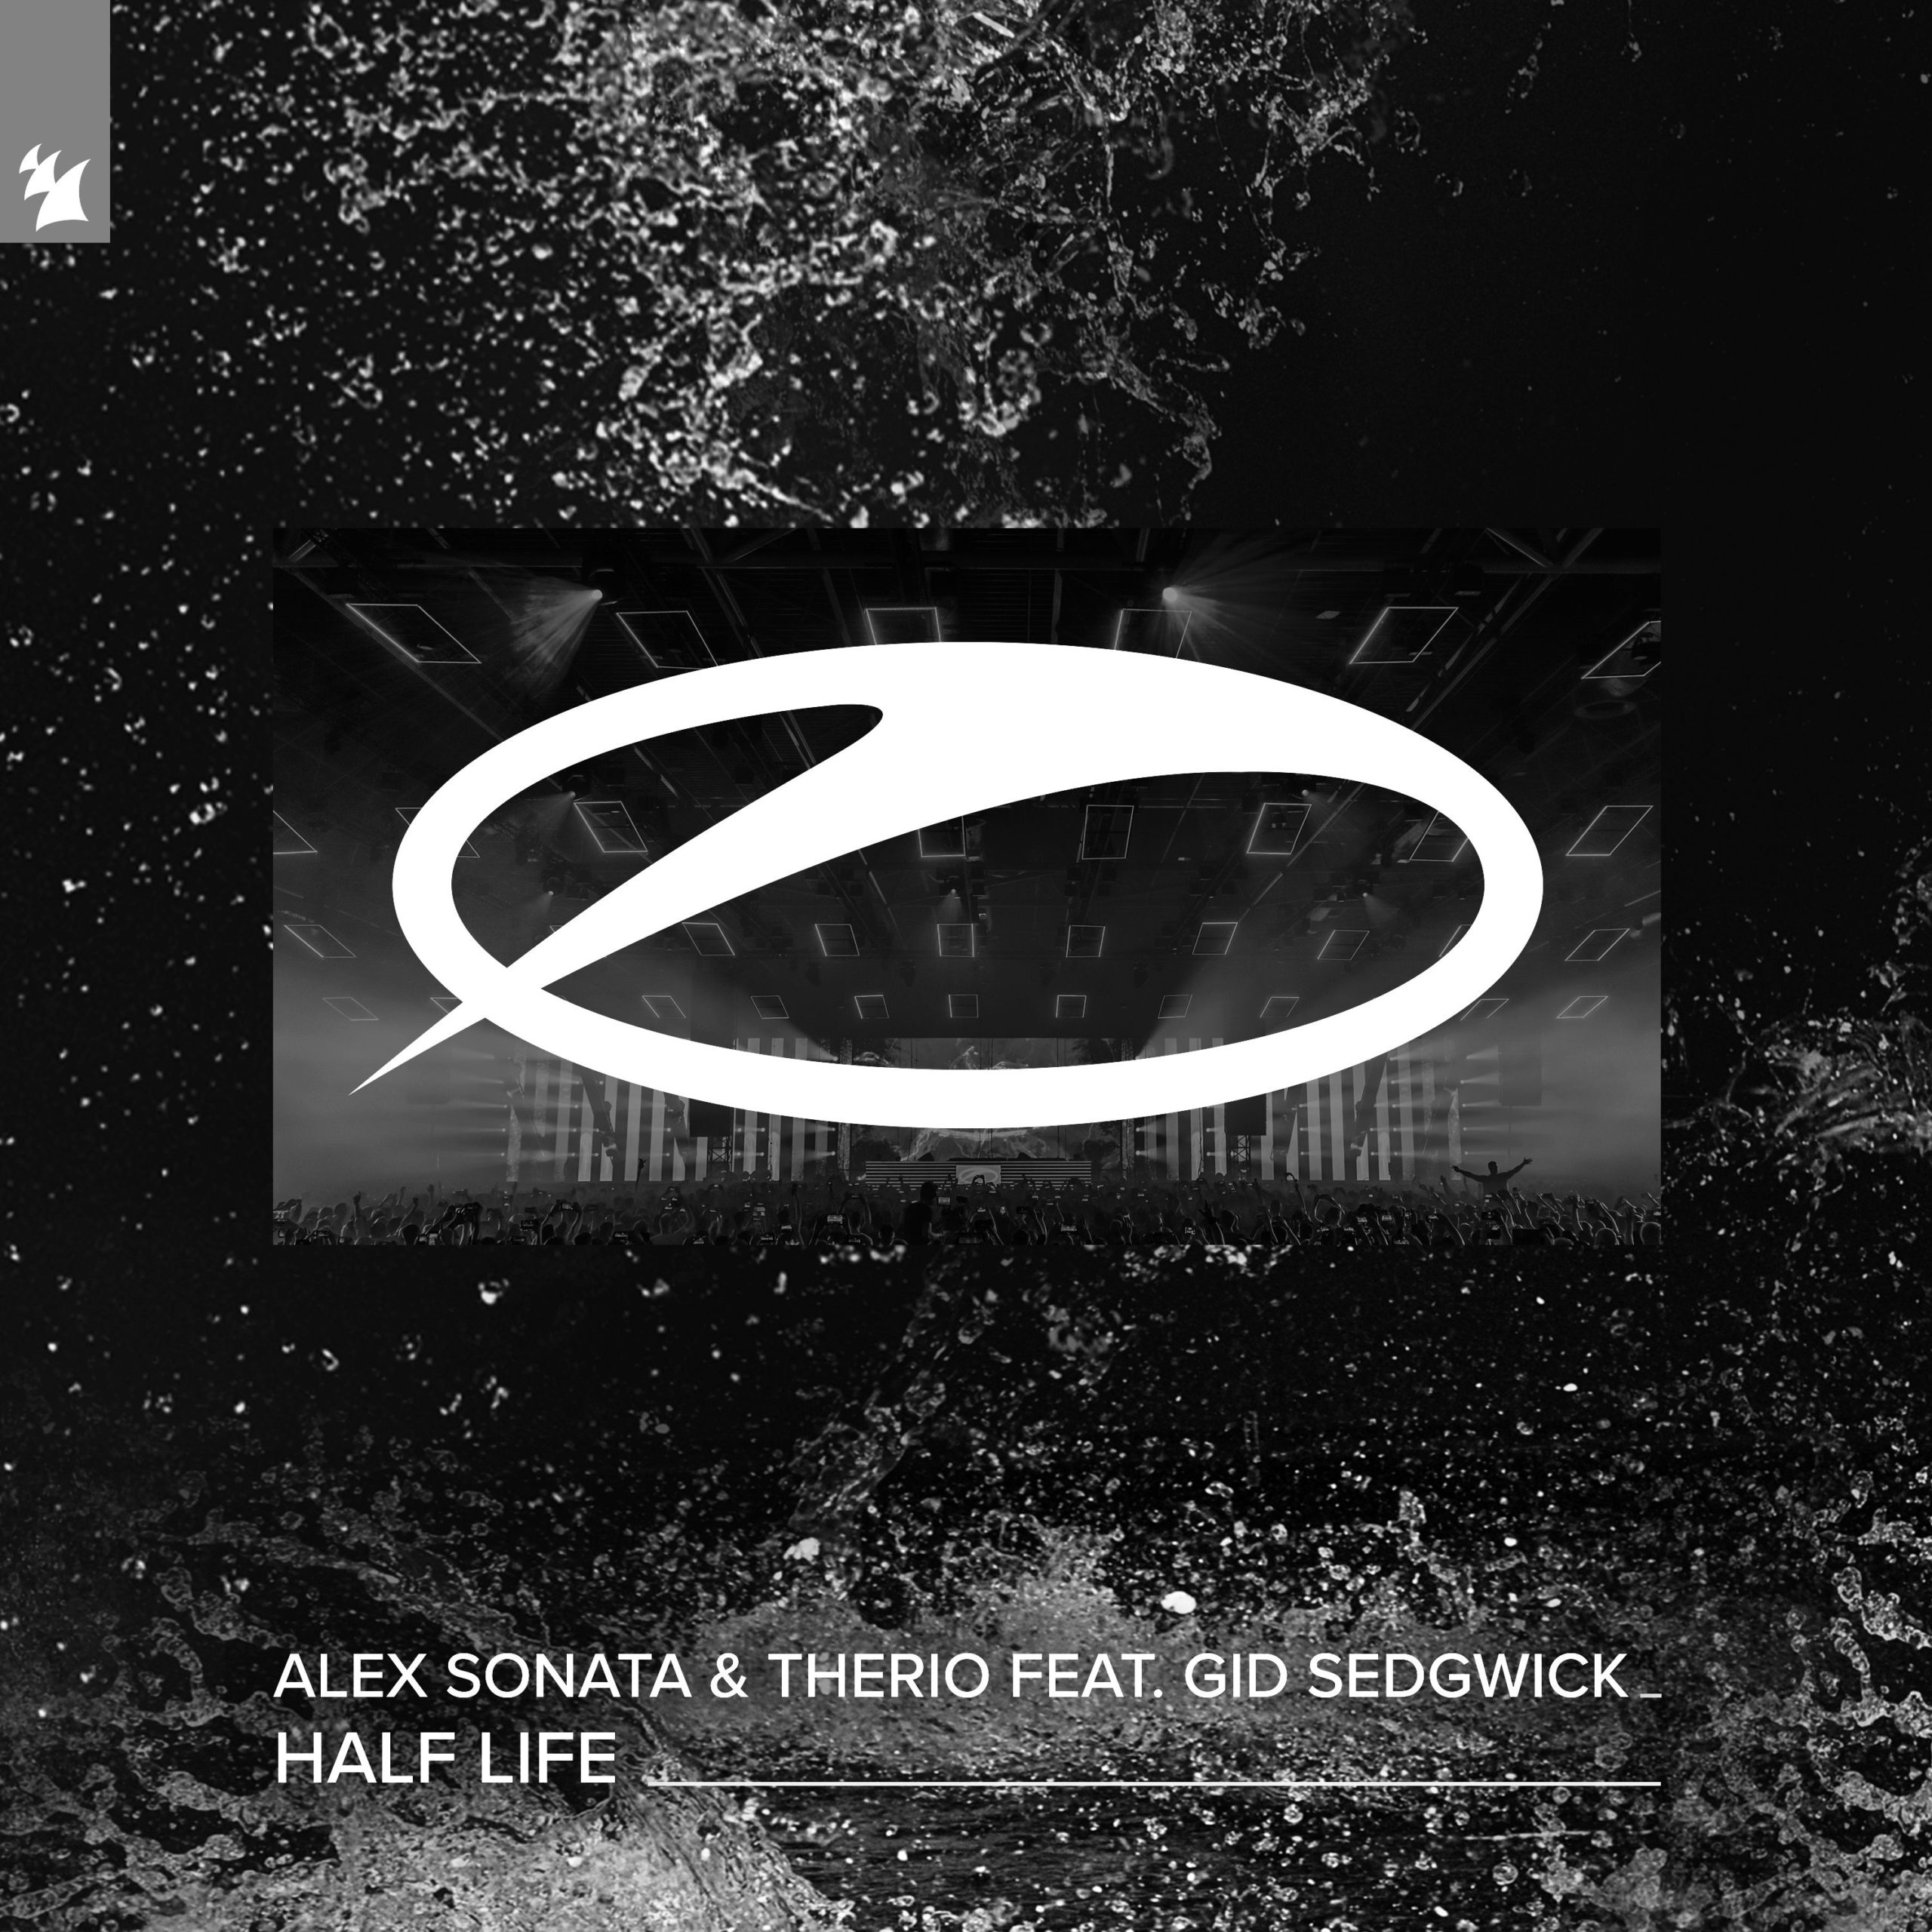 Alex Sonata and TheRio feat. Gid Sedgwick presents Half Life on A State Of Trance